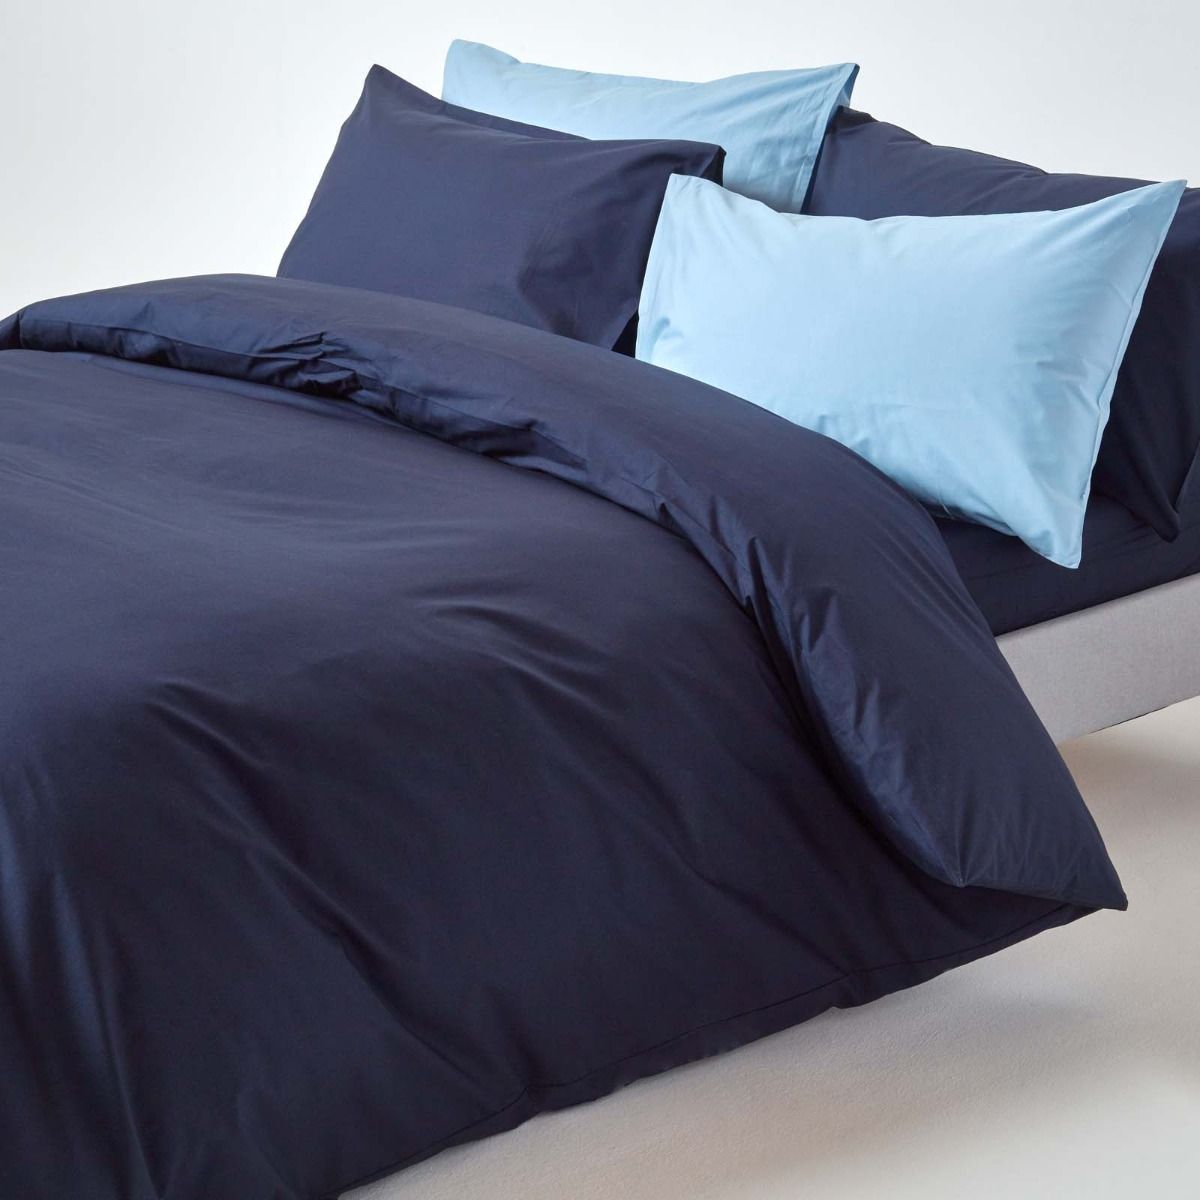 200 Thread Count Egyptian Cotton Bed Linen in Navy Blue All Sizes 